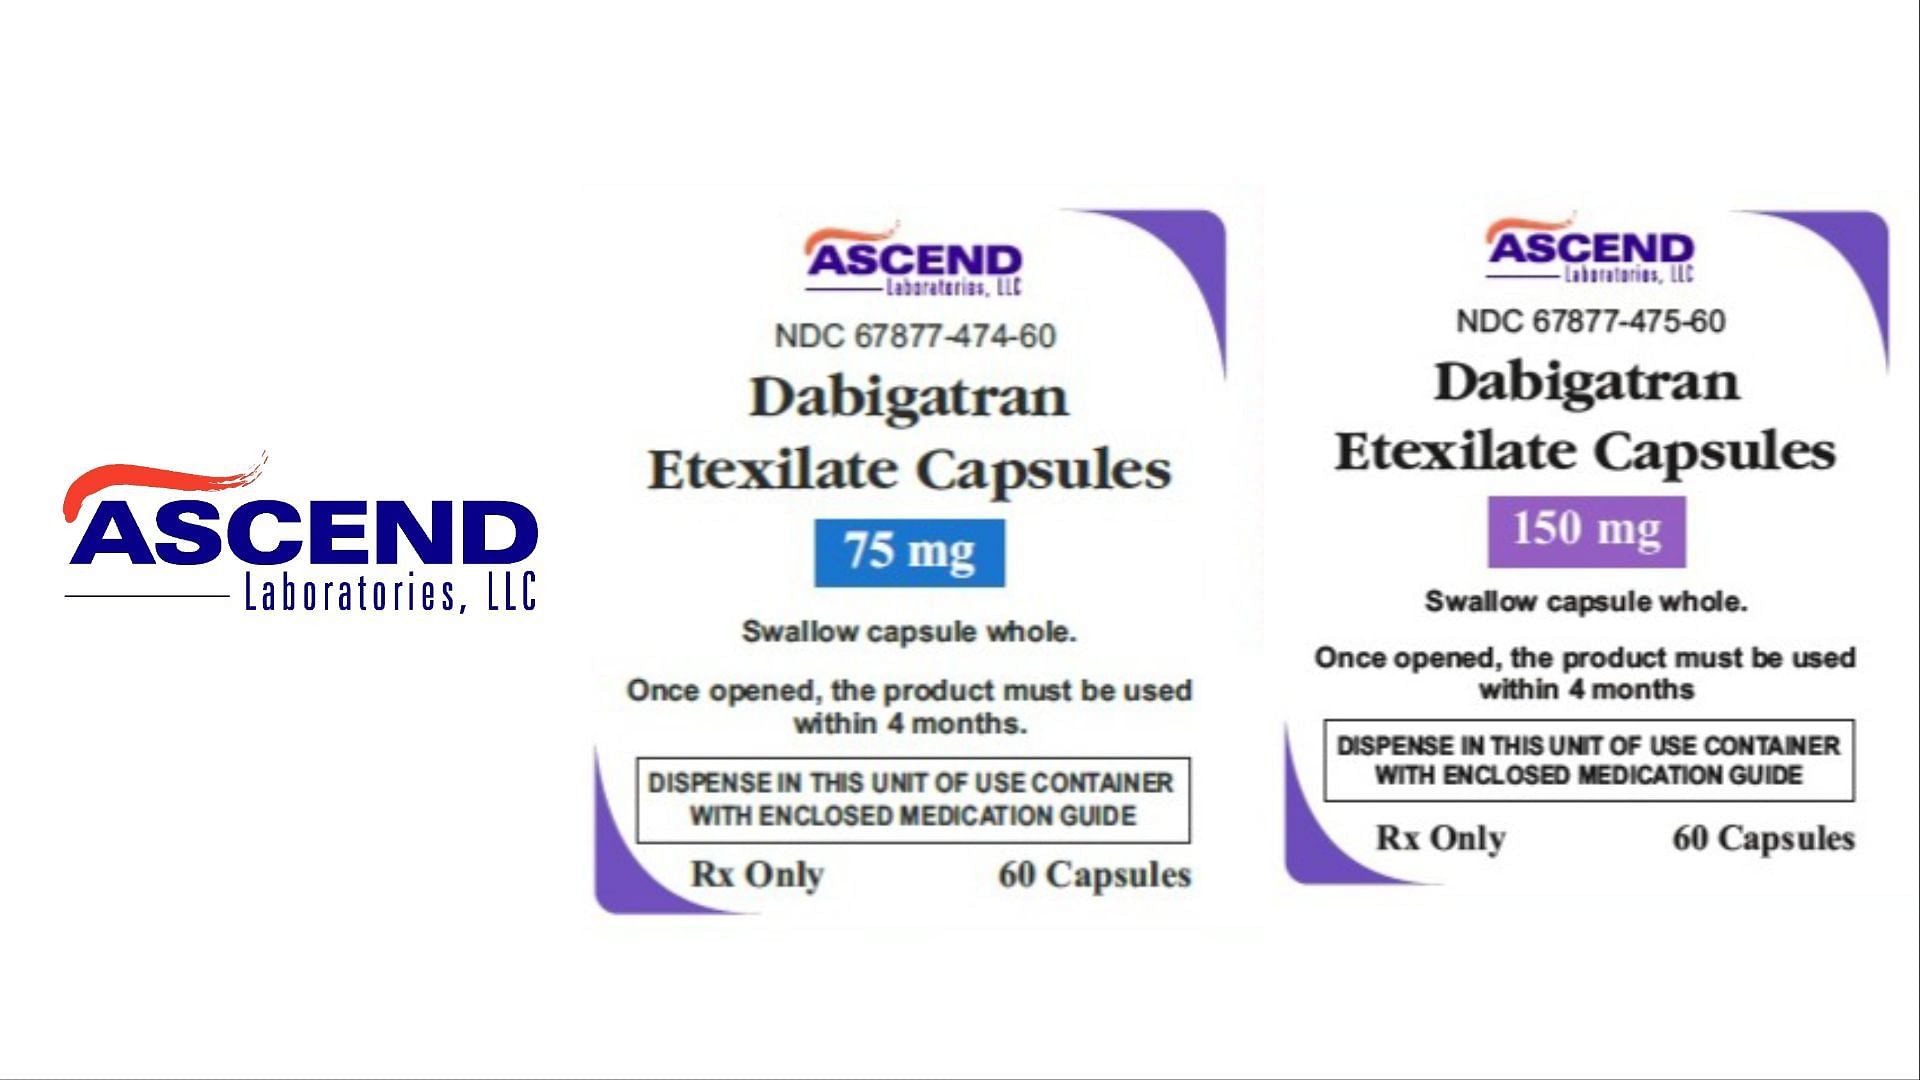 The recalled Dabigatran Etexilate Capsules. USP 75 mg and 150 mg were produced and distributed by Ascend Laboratories LLC. of New Jersey (Image via FDAreport.com)